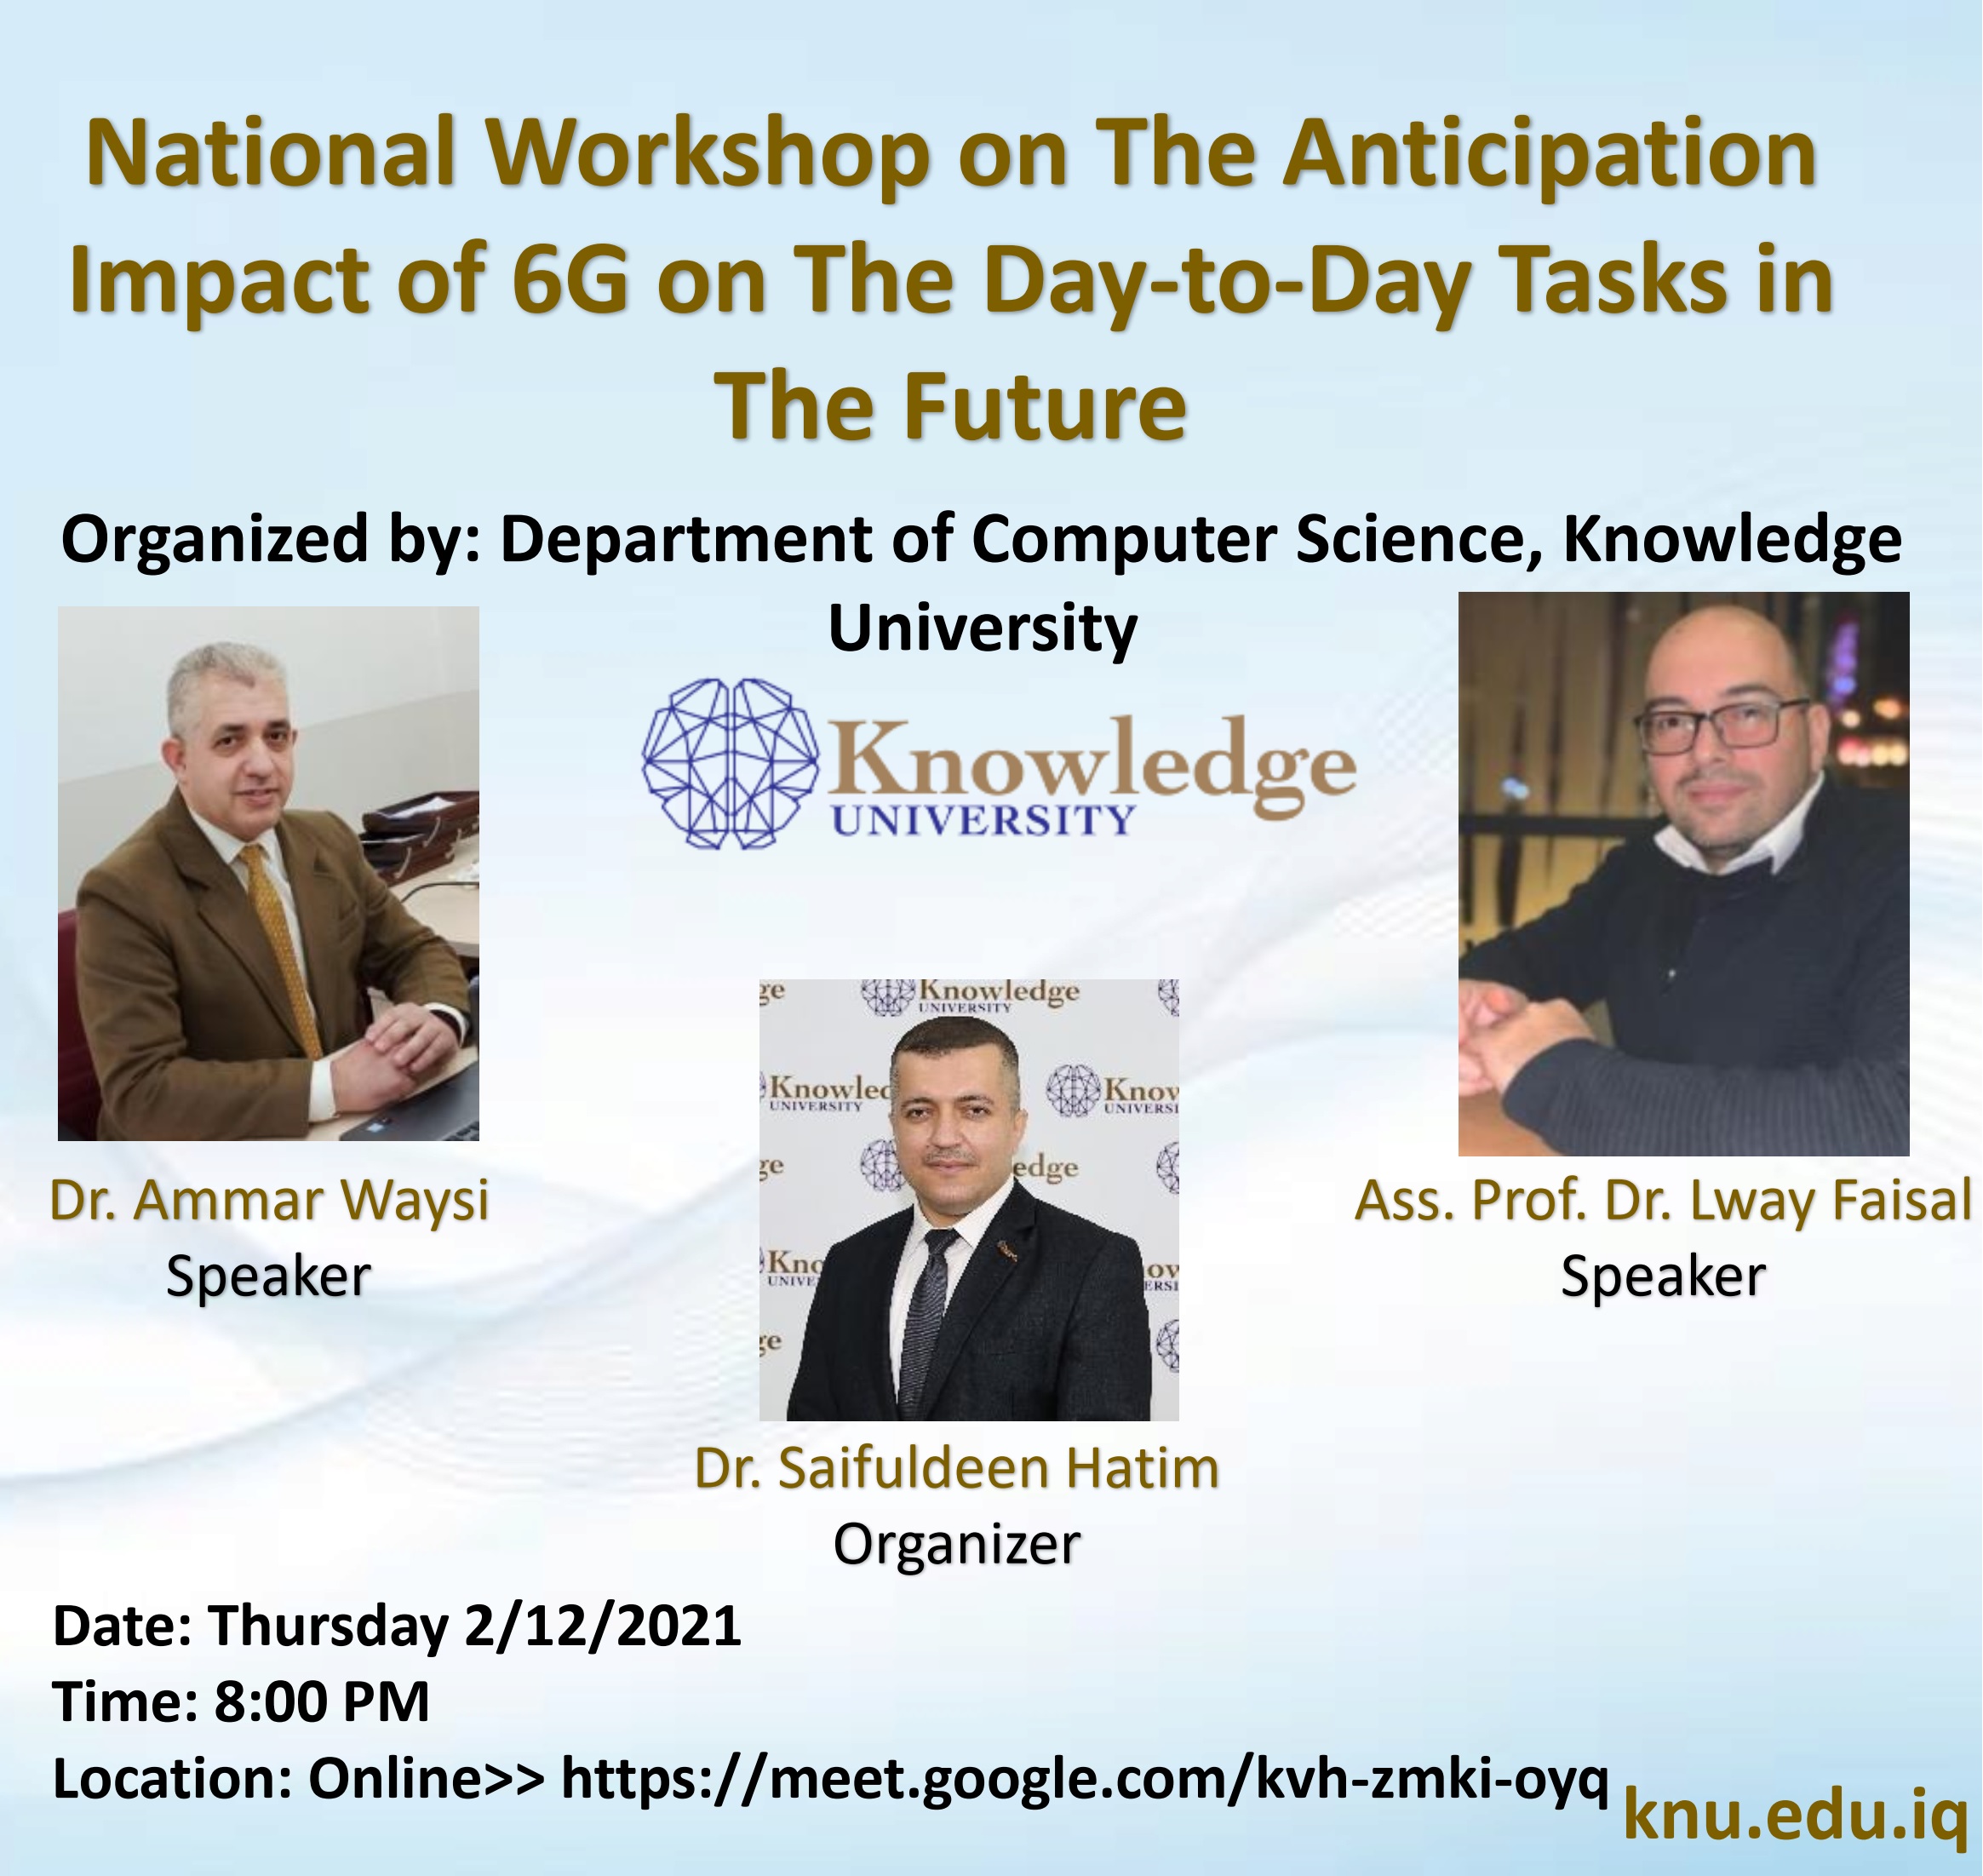 National Workshop on The Anticipation Impact of 6G on The Day-to-Day Tasks in The Future